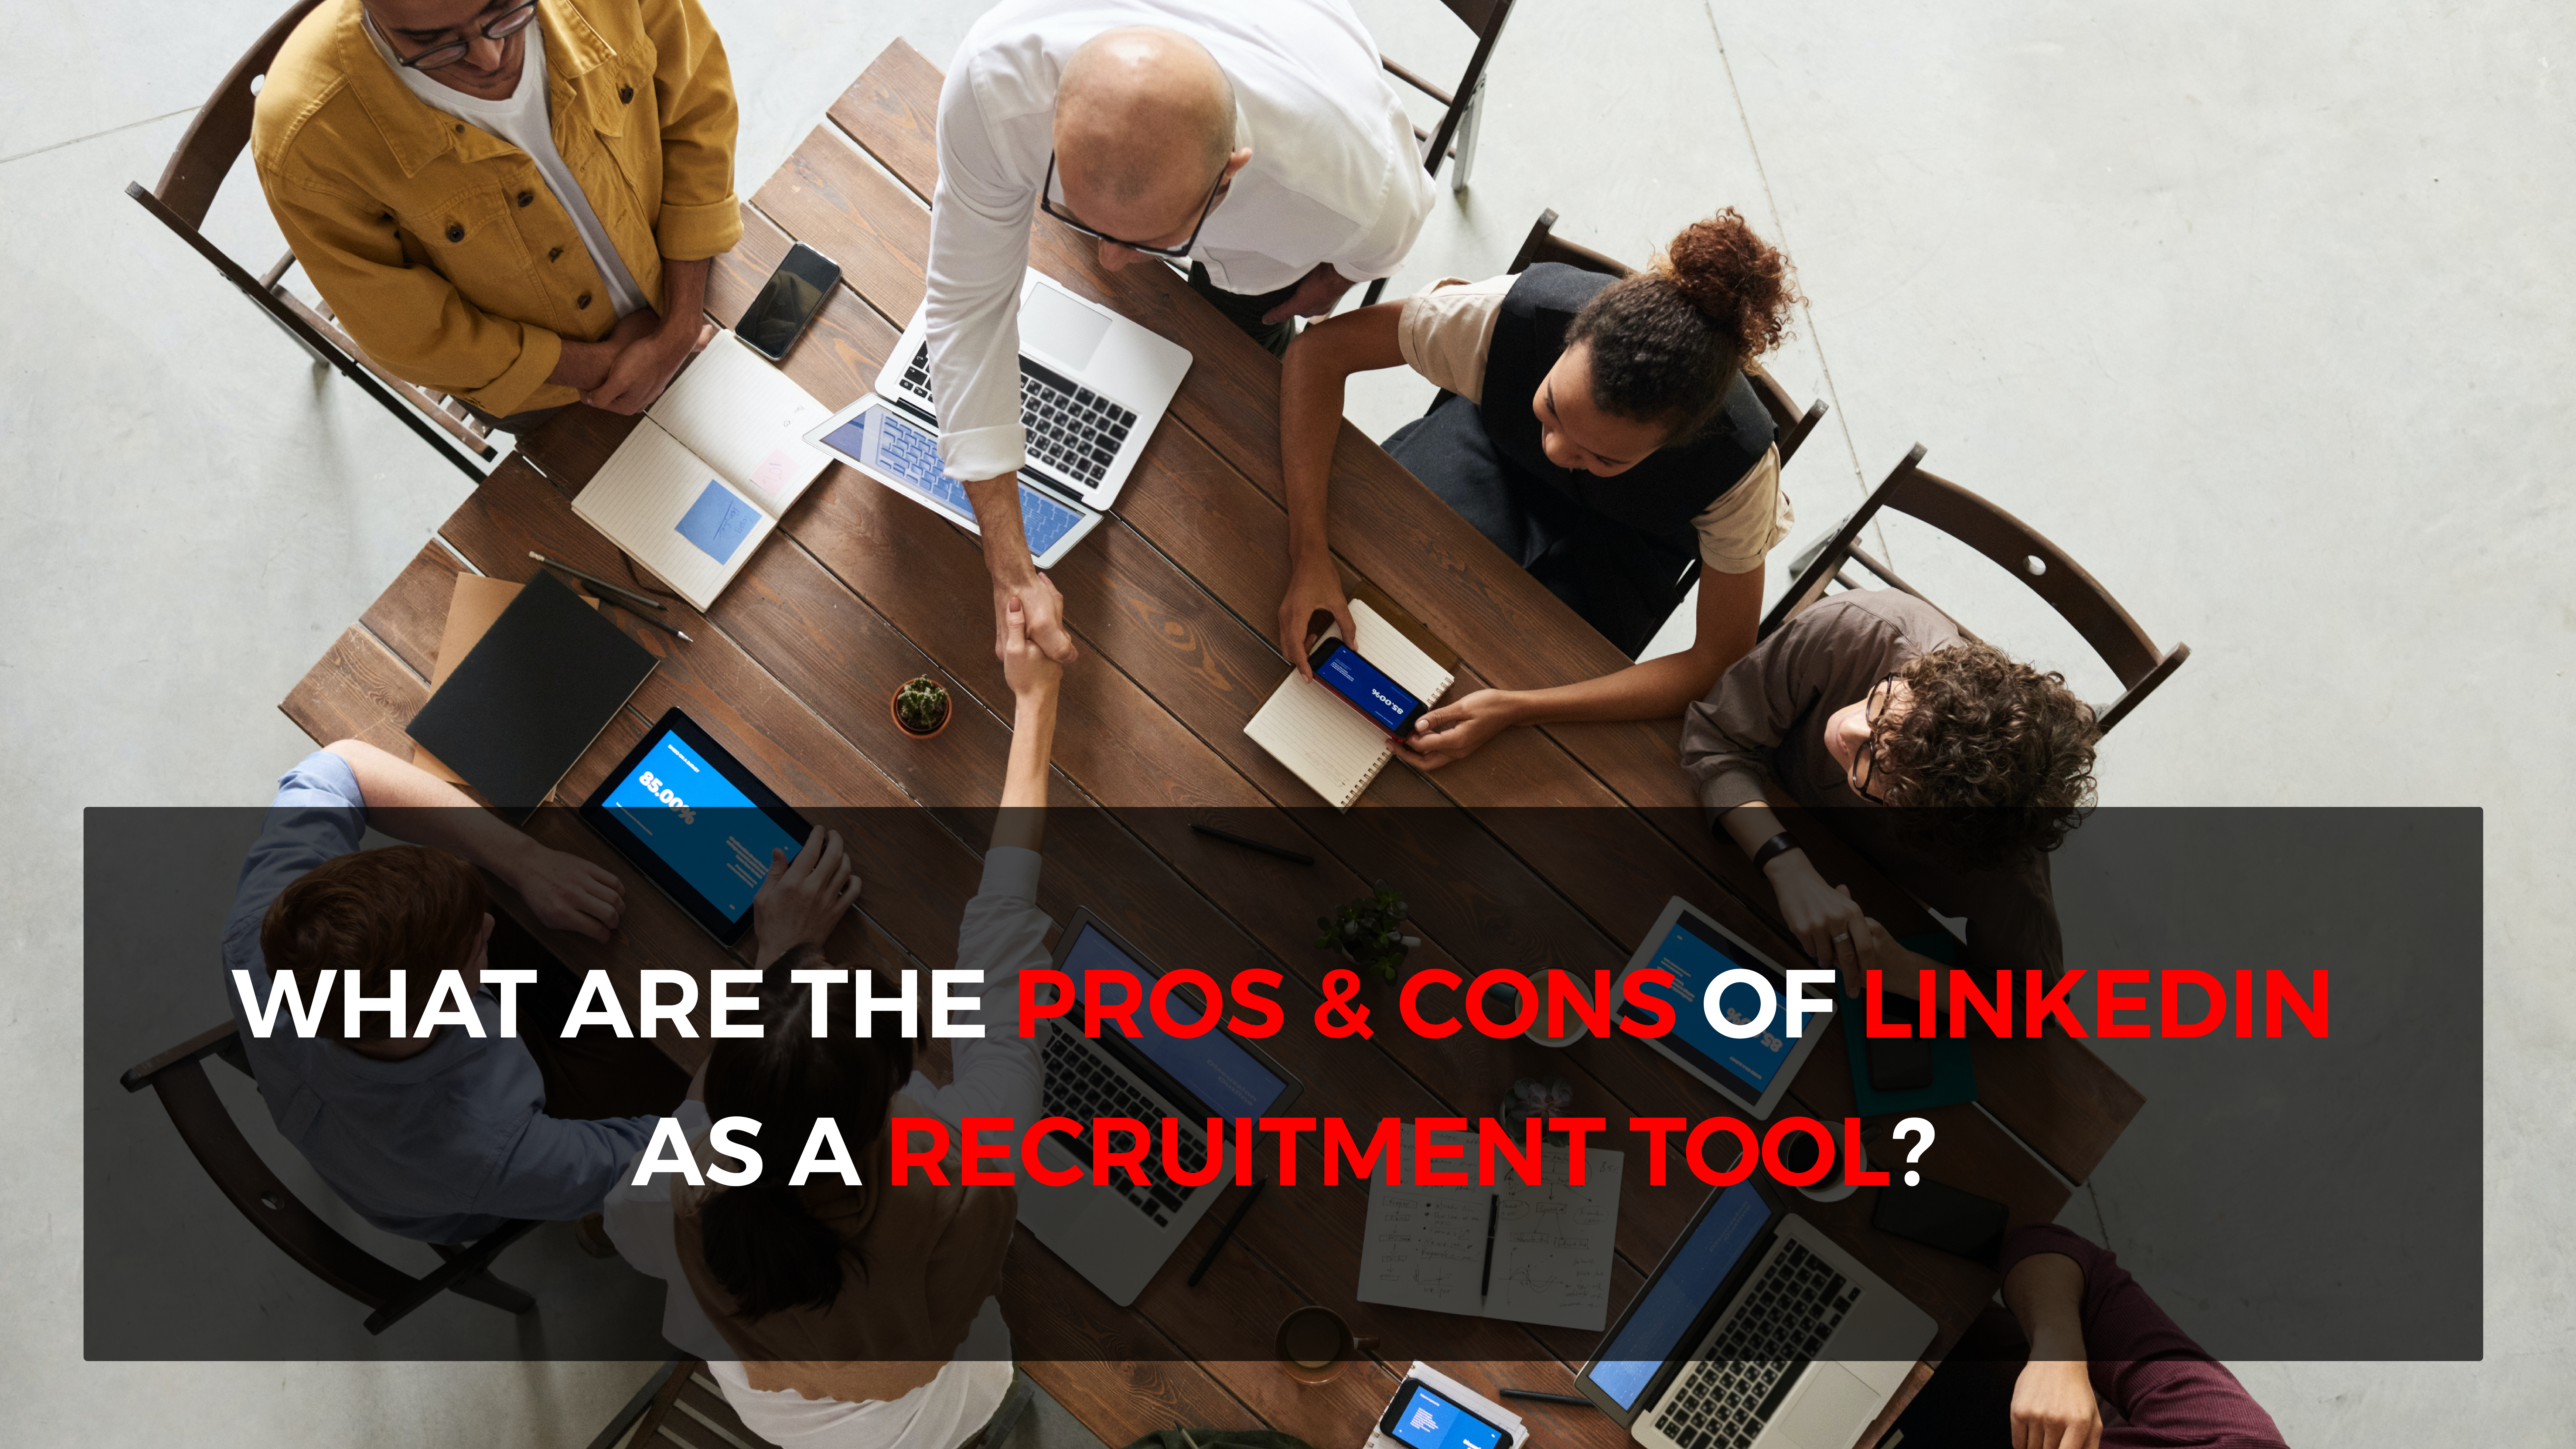 What are the pros and cons of LinkedIn as a recruitment tool?